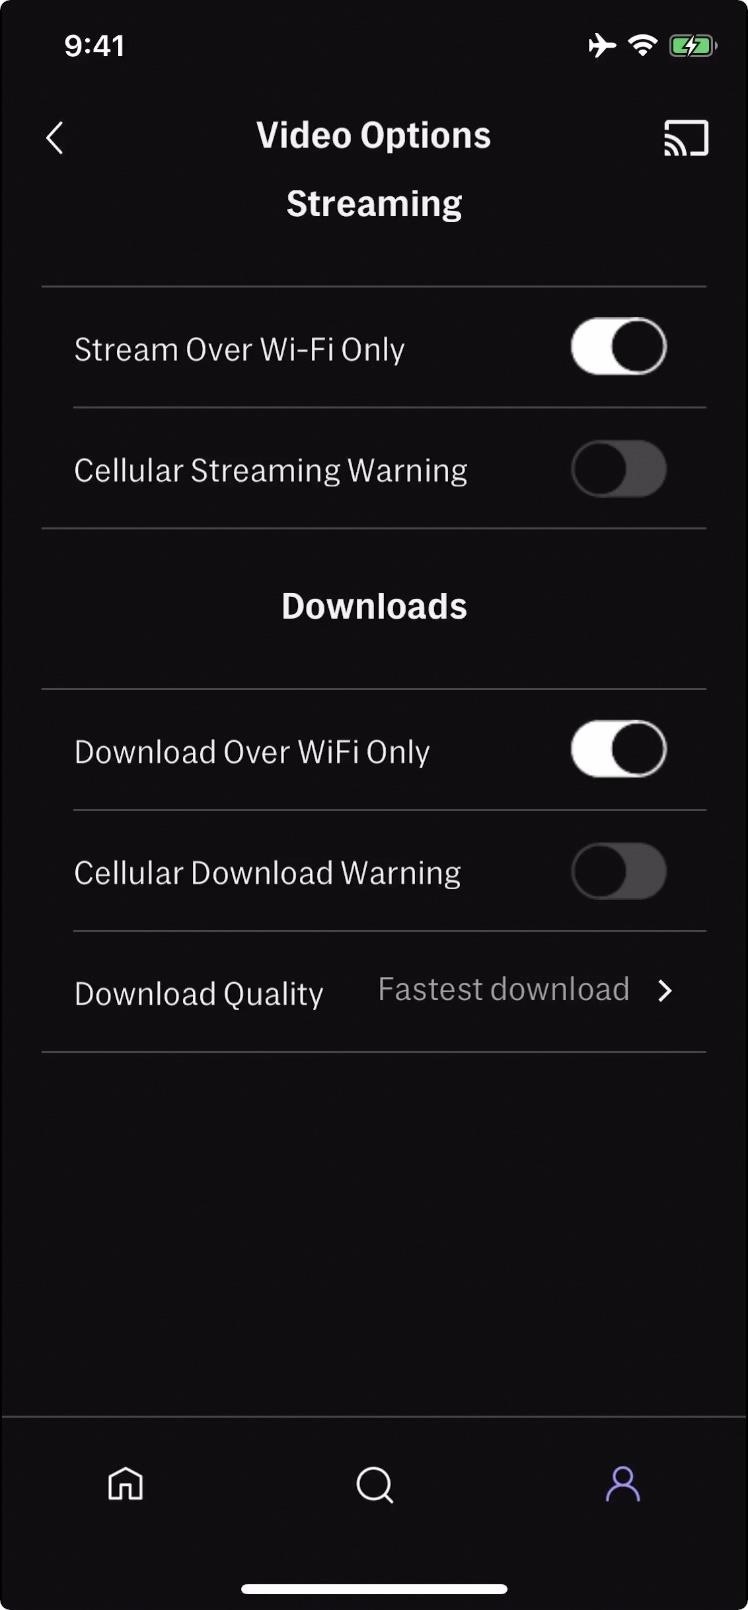 How to Stream & Download HBO Max Over Cellular Data